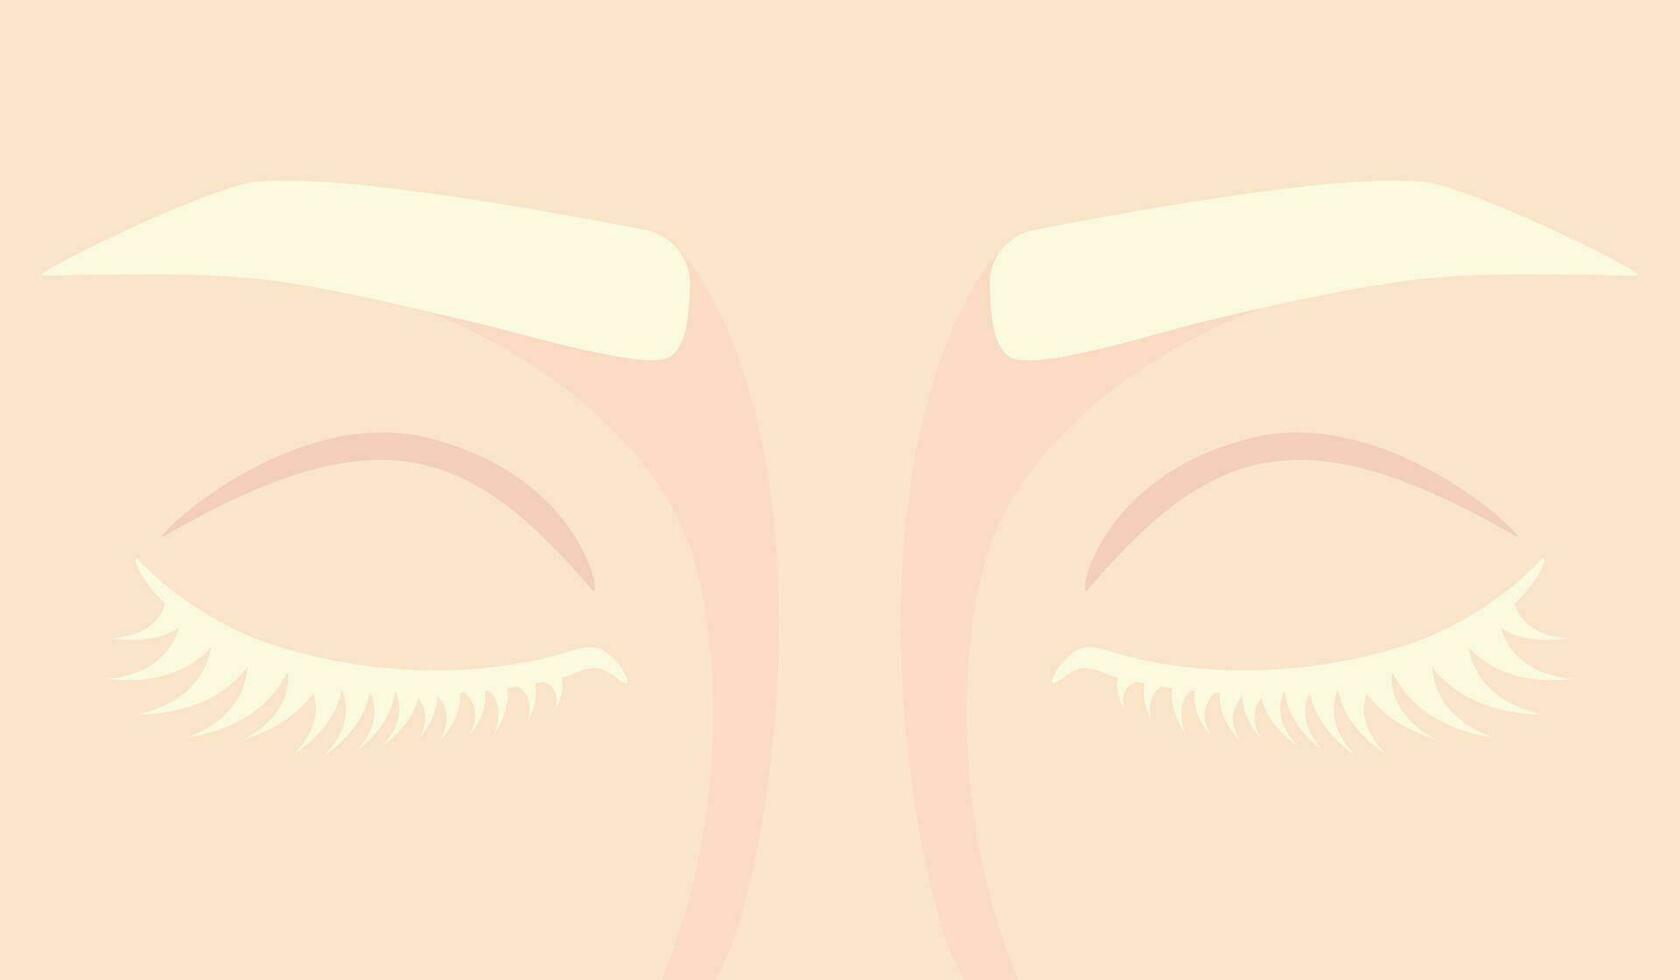 Albino woman eyes closed. Closed eyes with lashes and eyebrows. Vector illustration